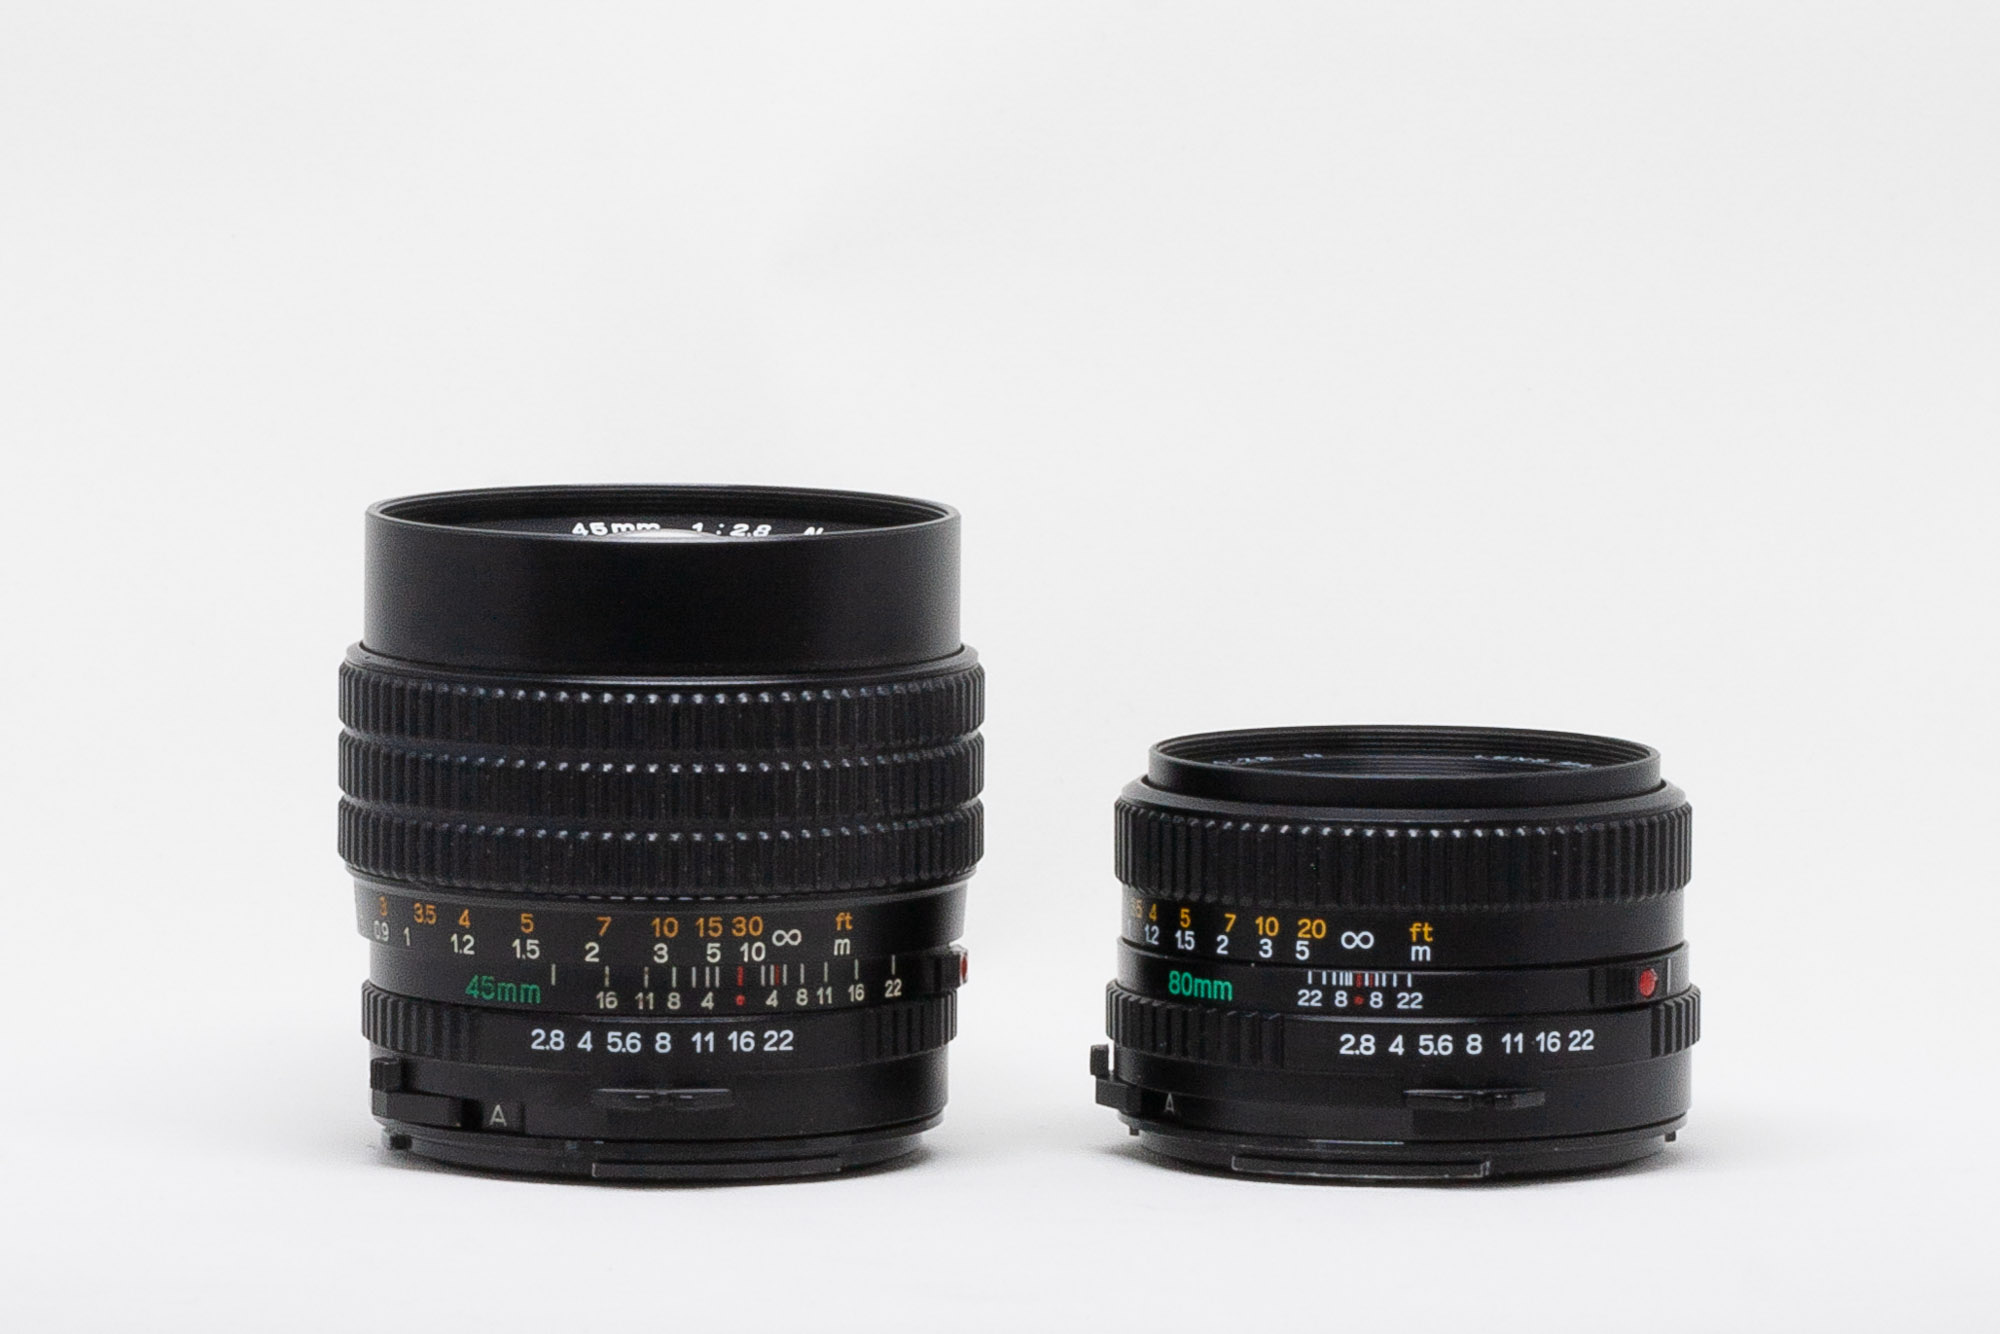 Side comparison of Mamiya-Sekor C 45mm f:2.8 N and Mamiya-Sekor C 80mm f:2.8 N lenses